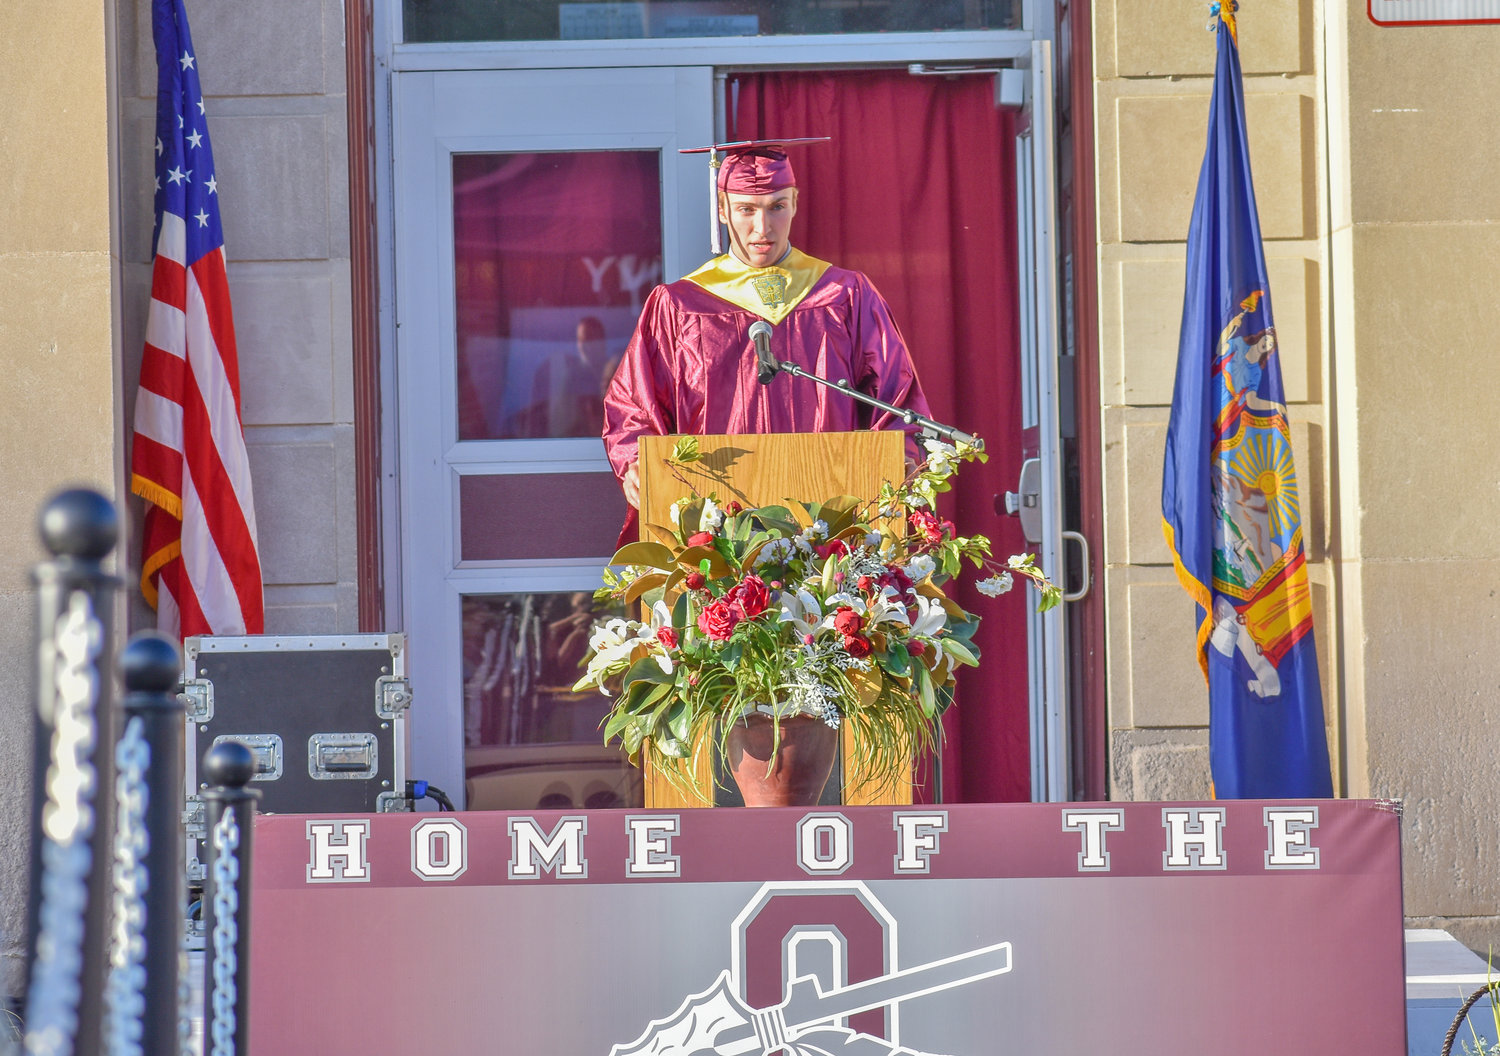 Oriskany Class of 2022 Co-Salutatorian Eric Noga gave a commencement speech during the ceremony on June 24, 2022, at 7 p.m.